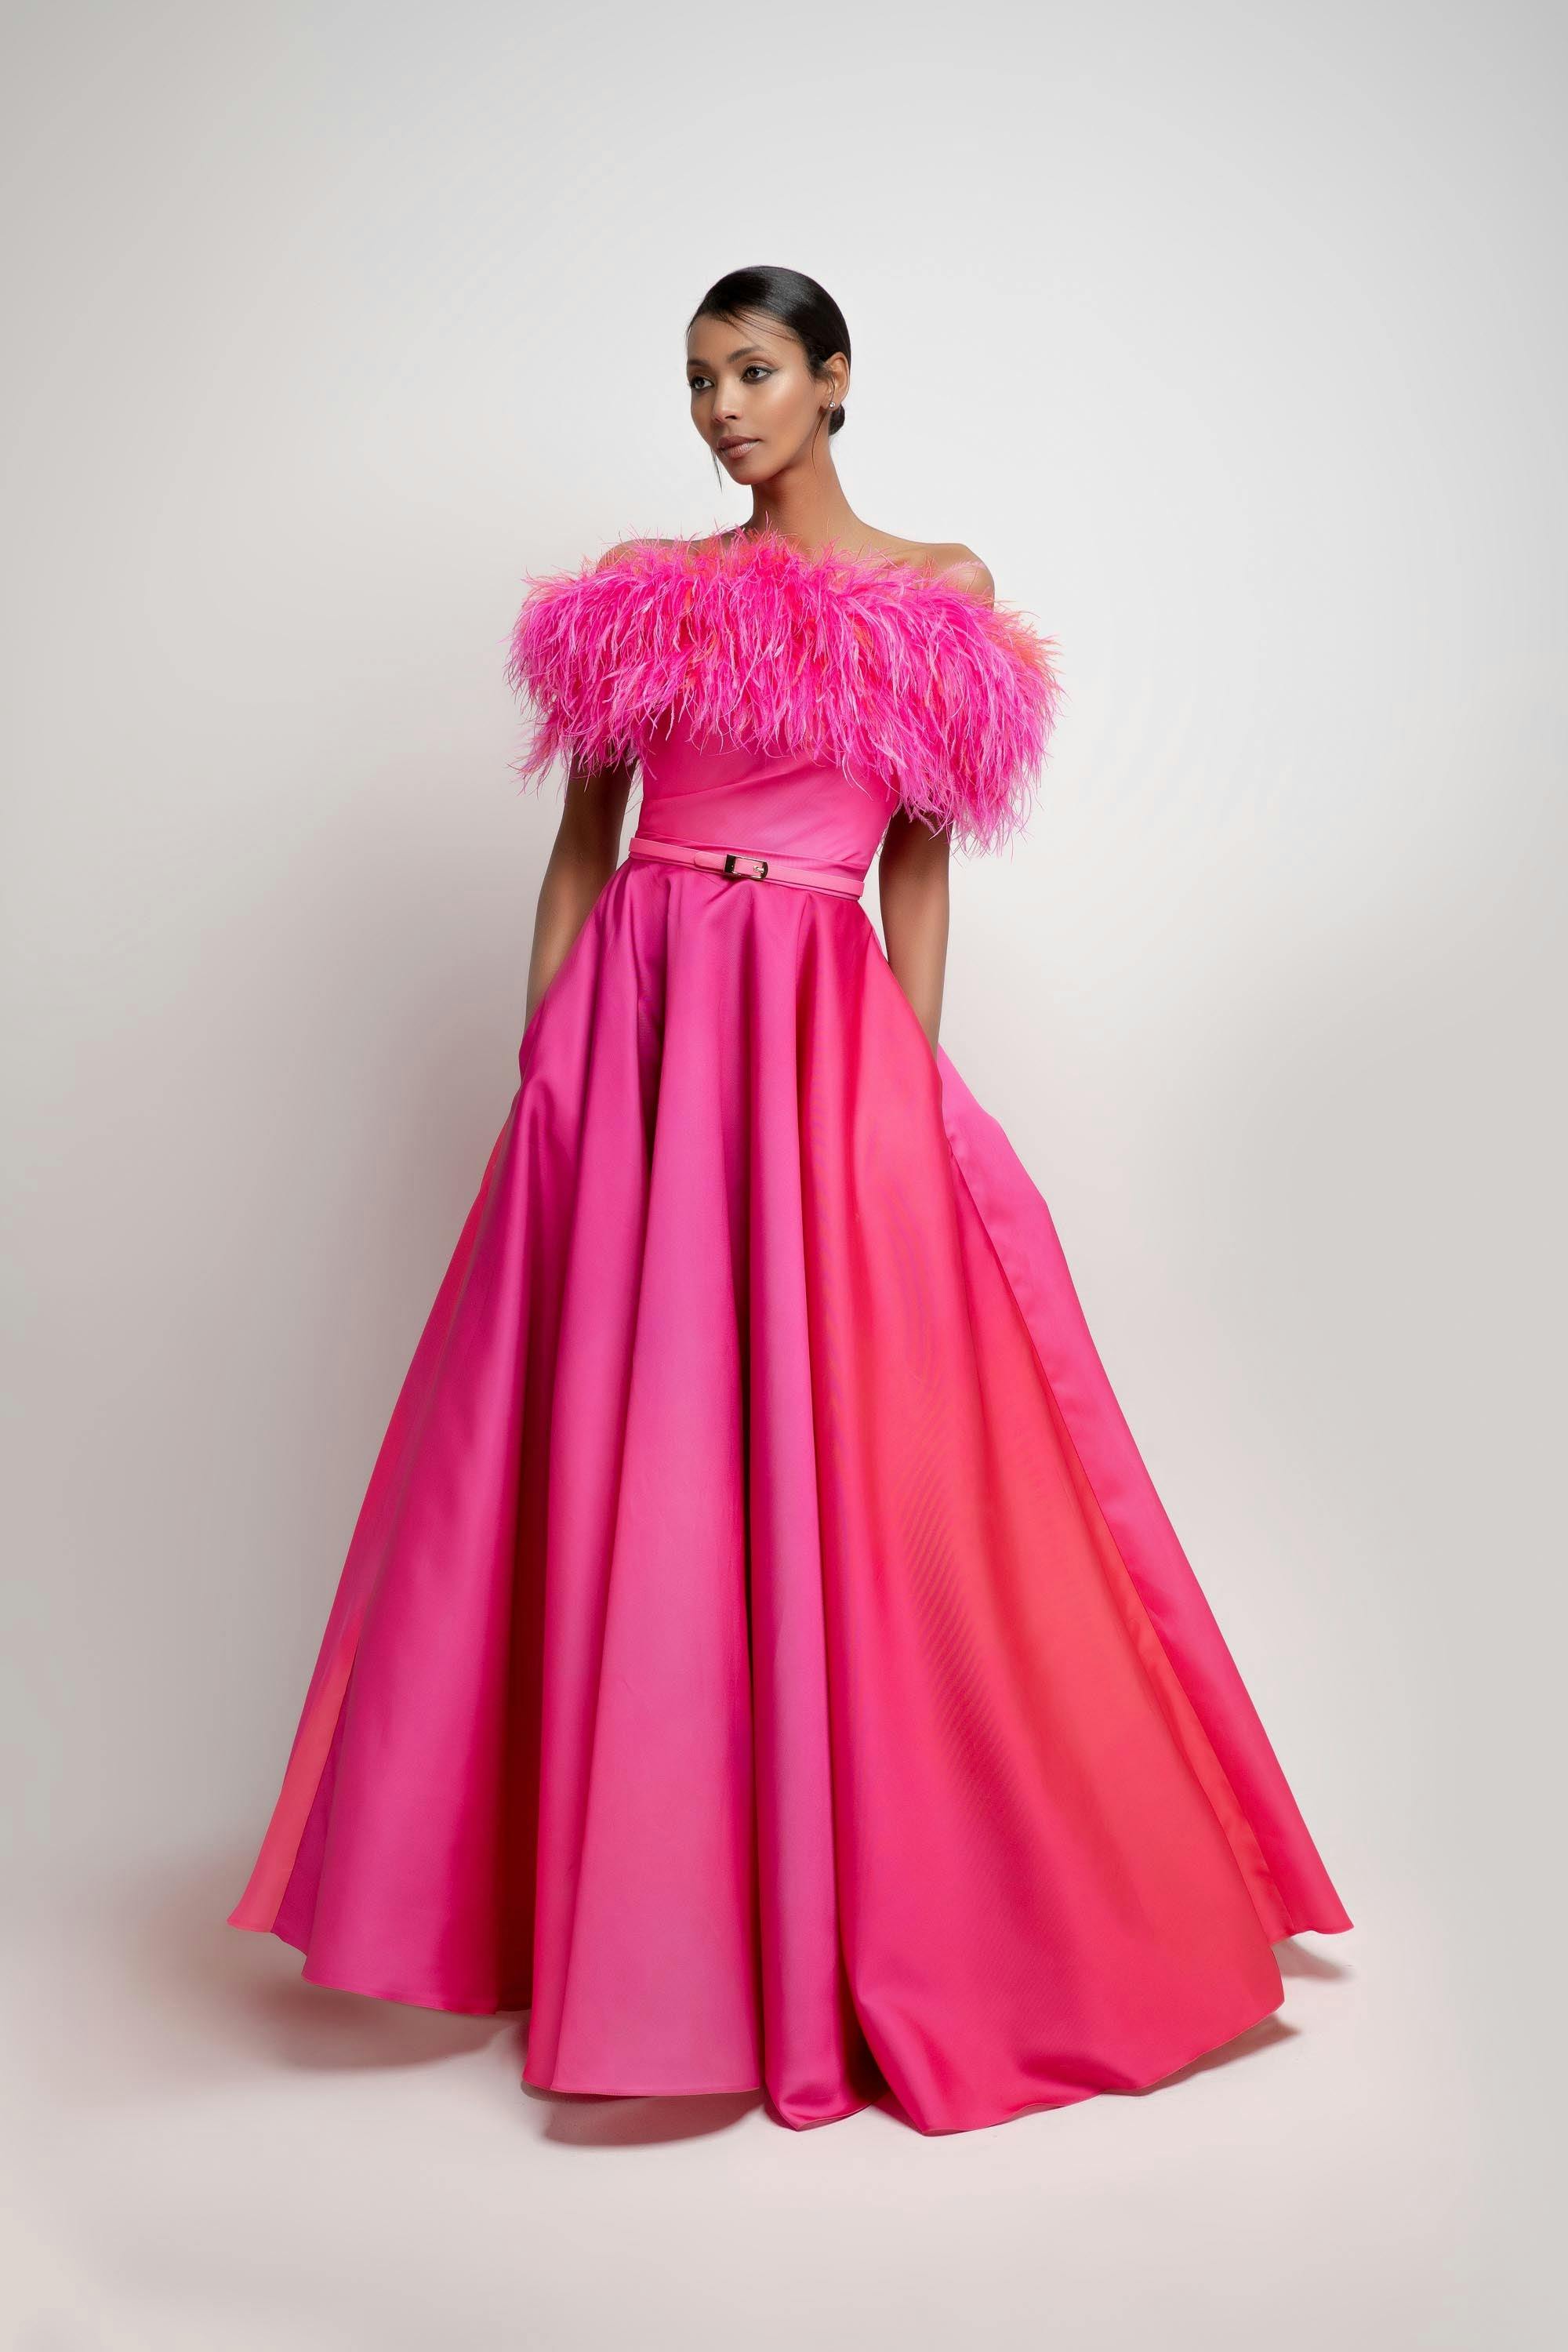 Look 5 - Jean fares couture - JFC- OFF-shoulders long feathers fushia dress with belt